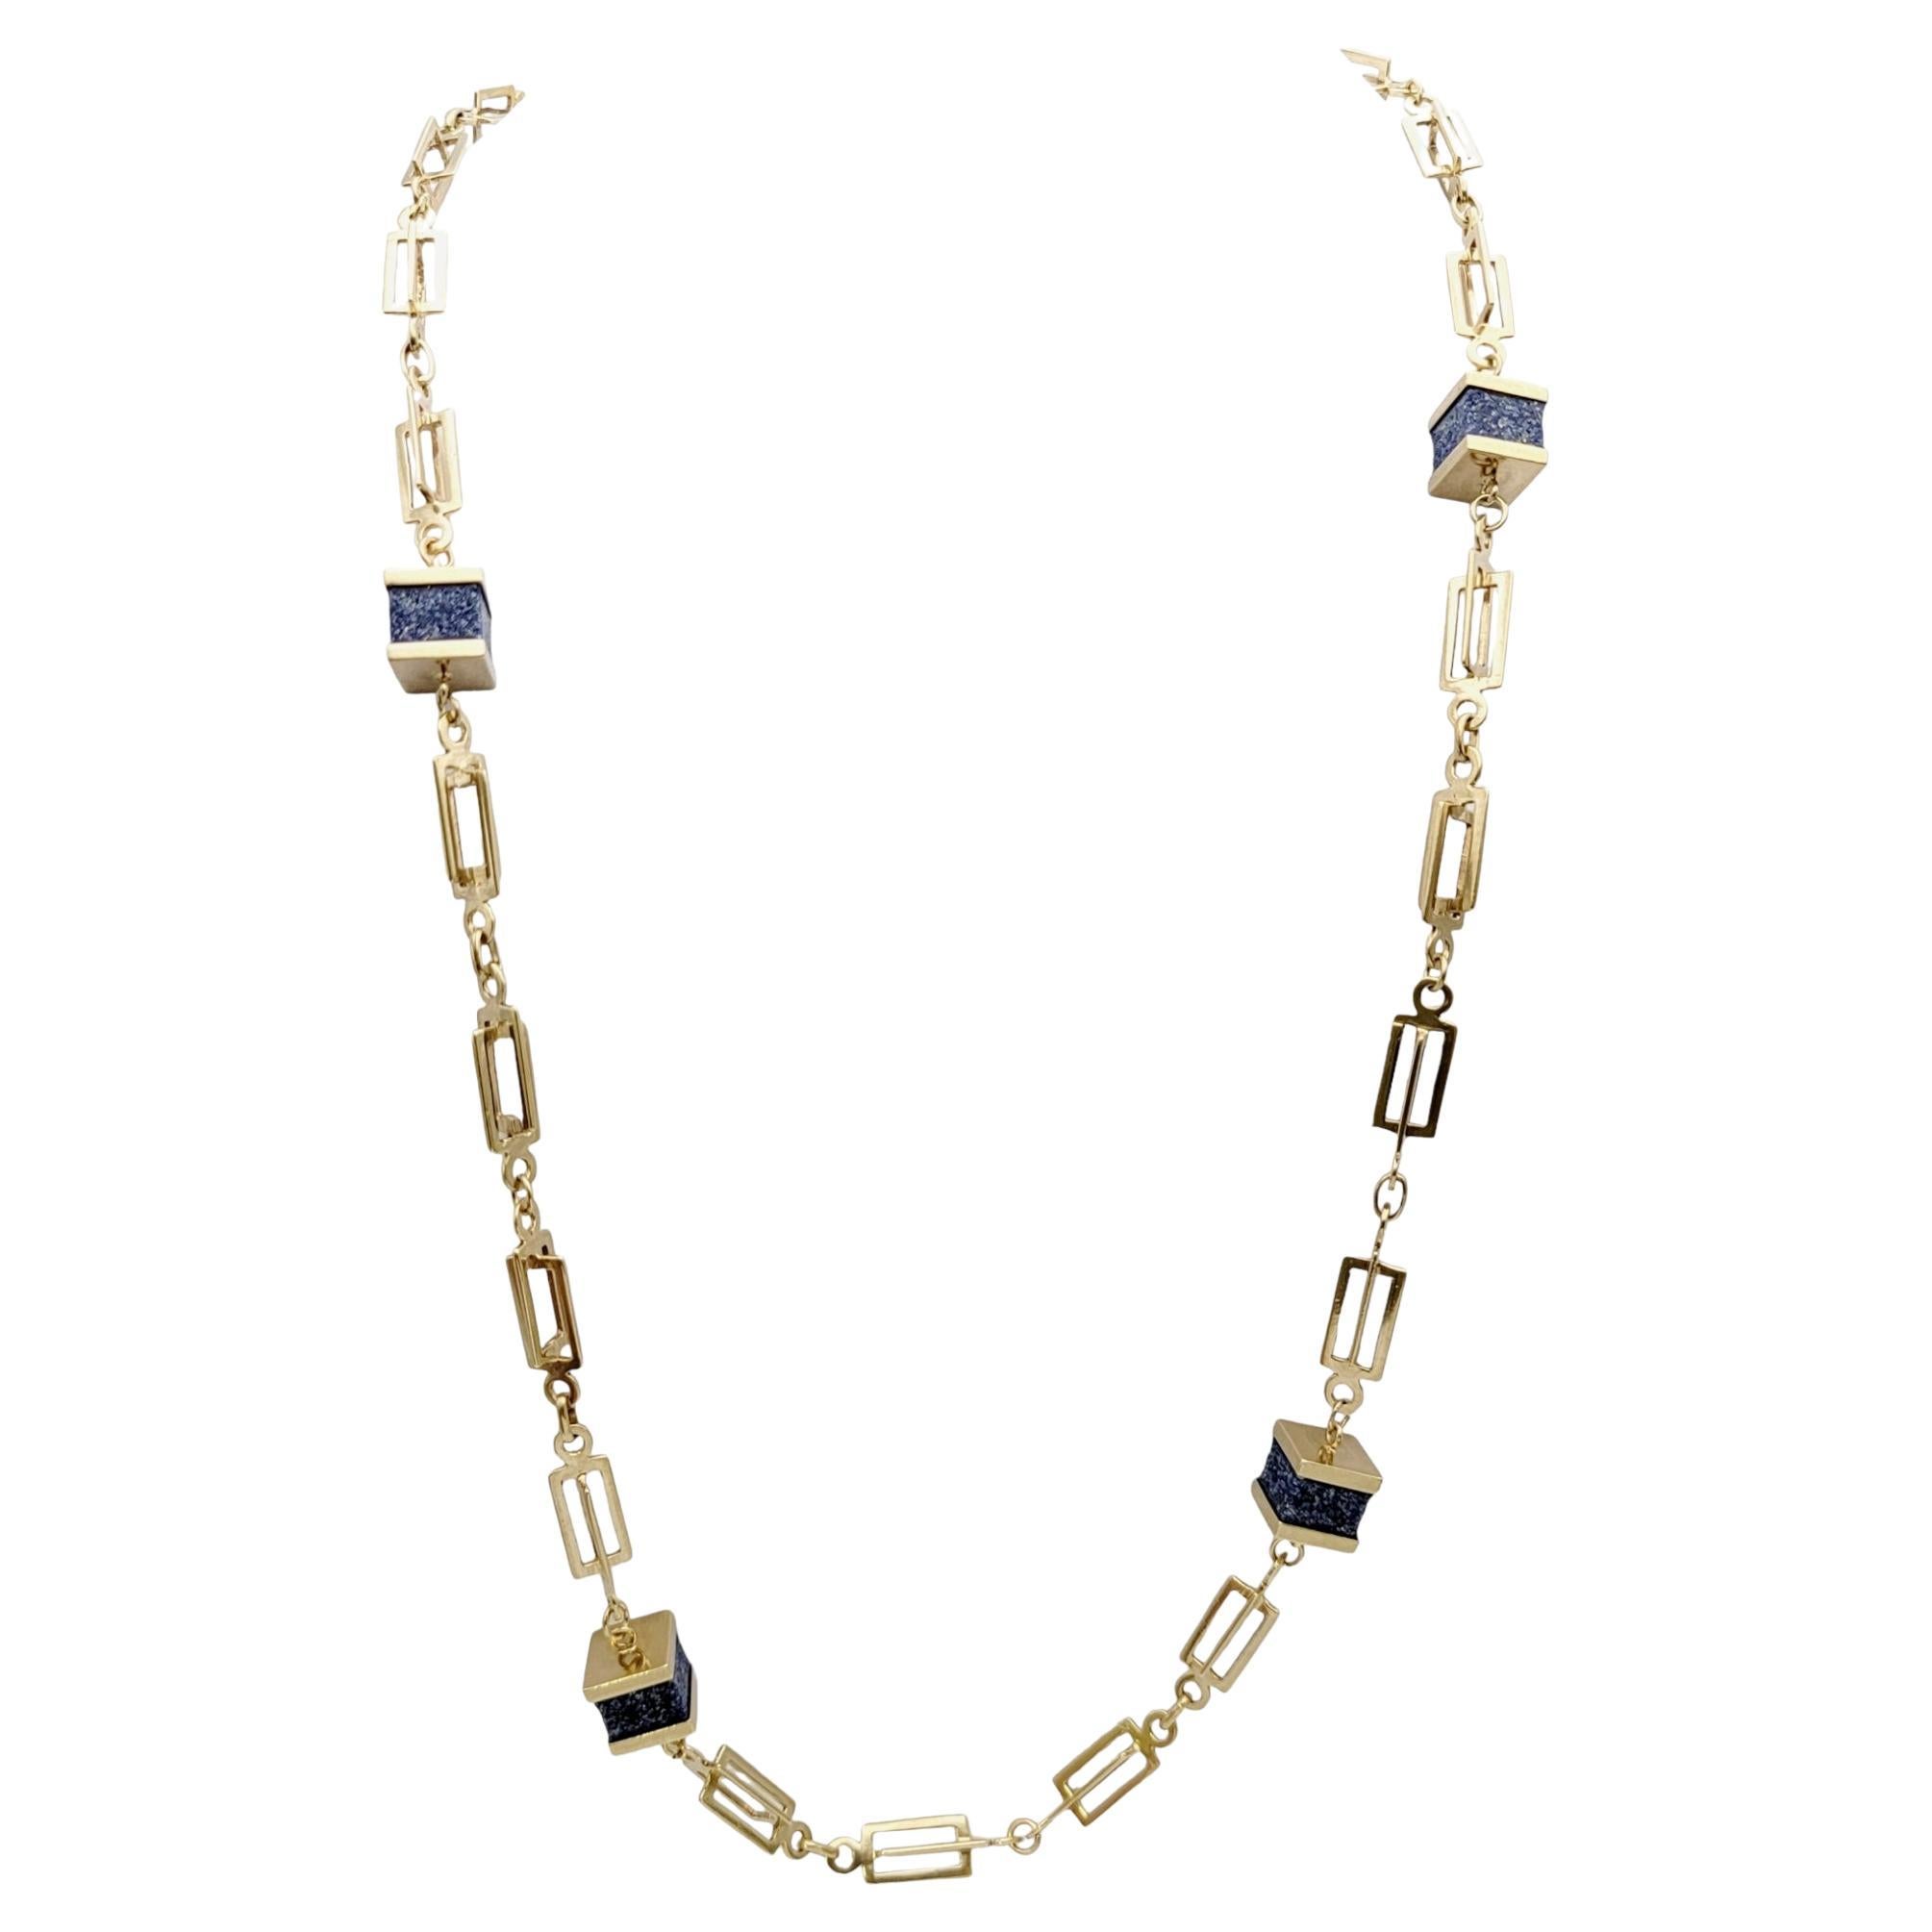 Square Lapis Lazuli Station Necklace with 14 Karat Yellow Gold Chain